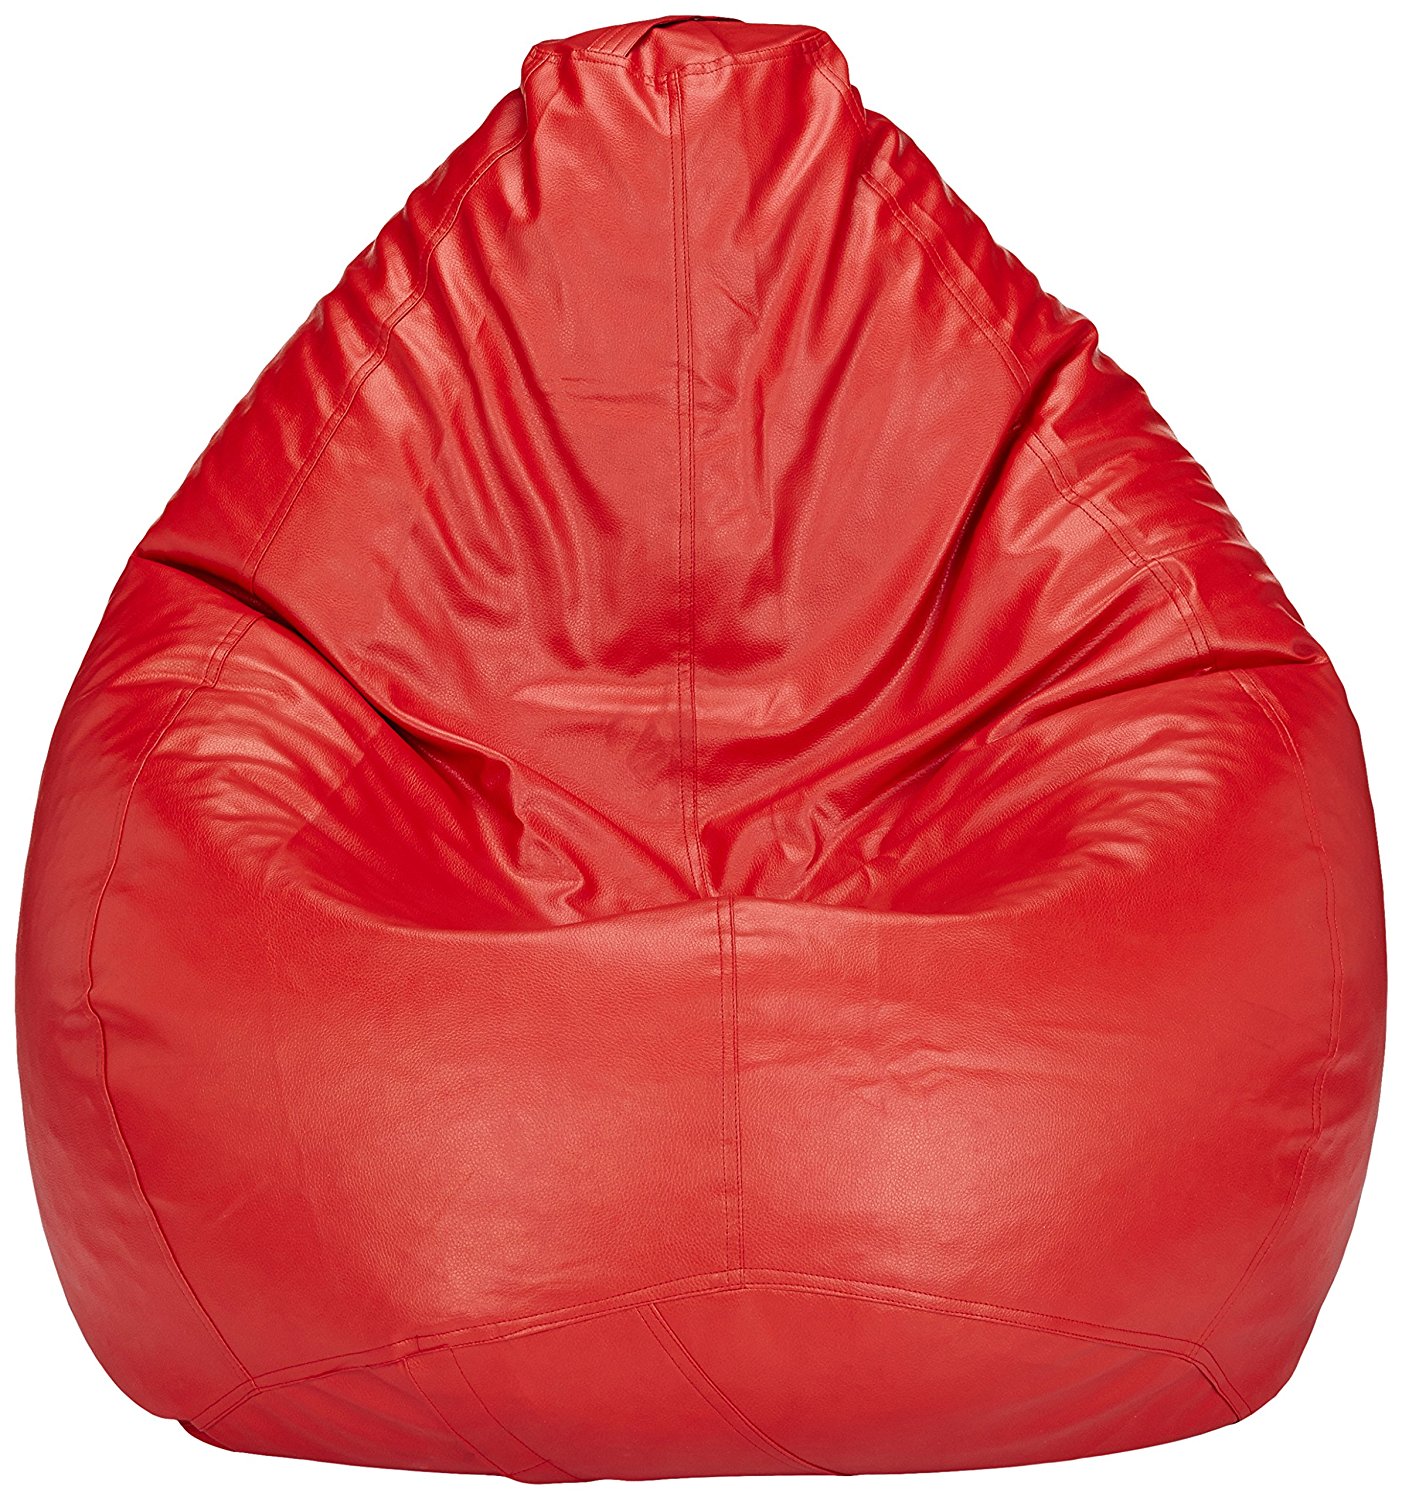 Amazon: Buy Solimo XXXL Bean Bag Cover Without Beans (Red) at Rs 549 only